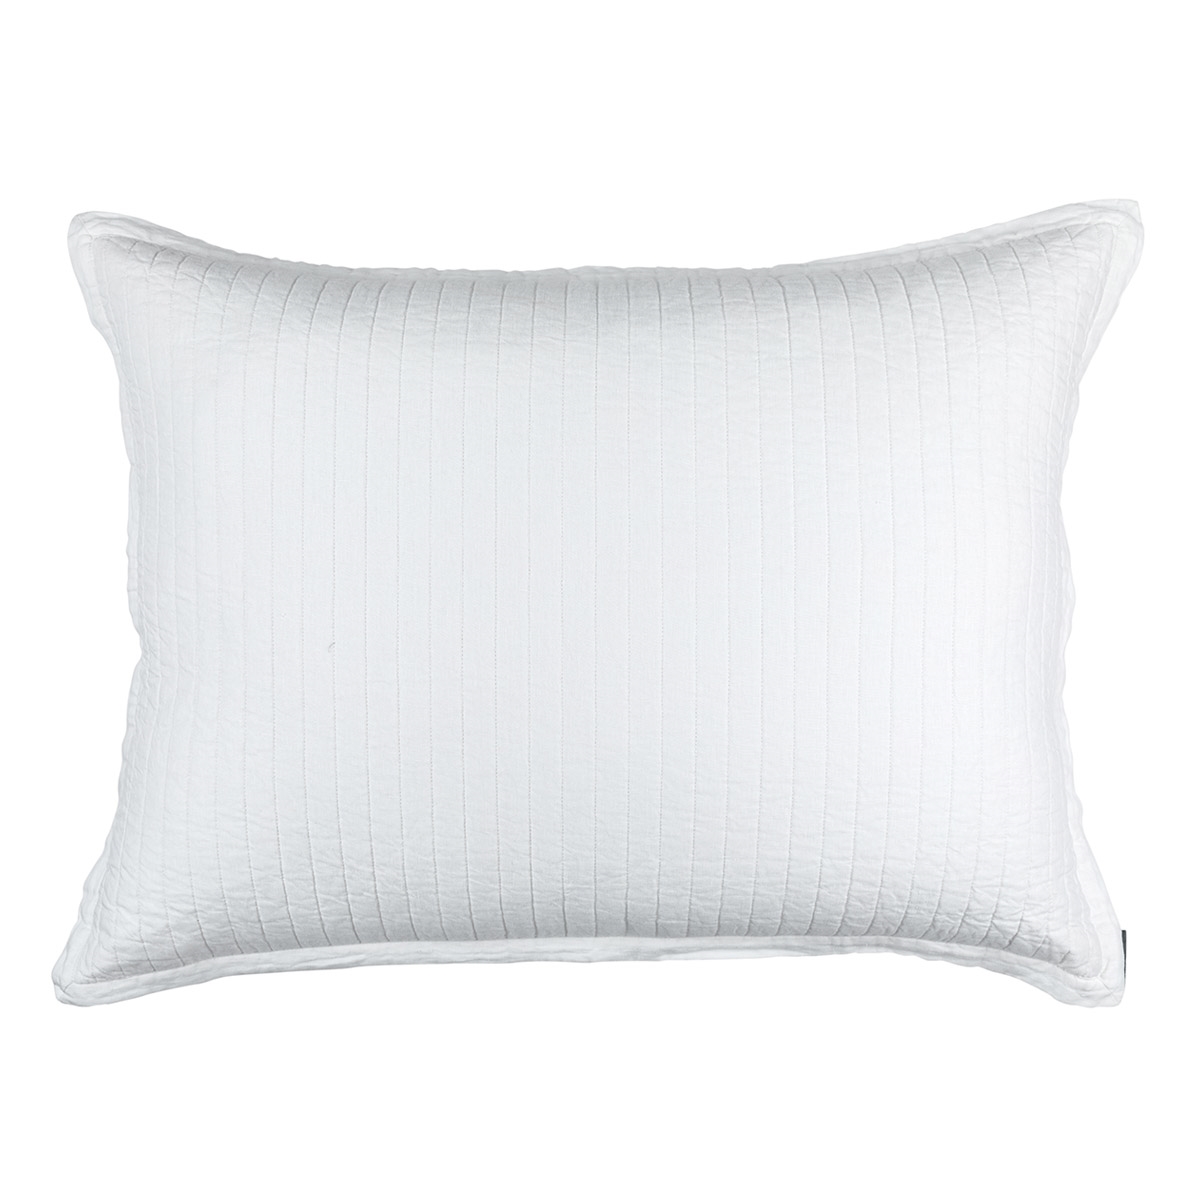 Lili Alessandra Tessa Quilted Luxe Euro Pillow White Linen 27x36 ...